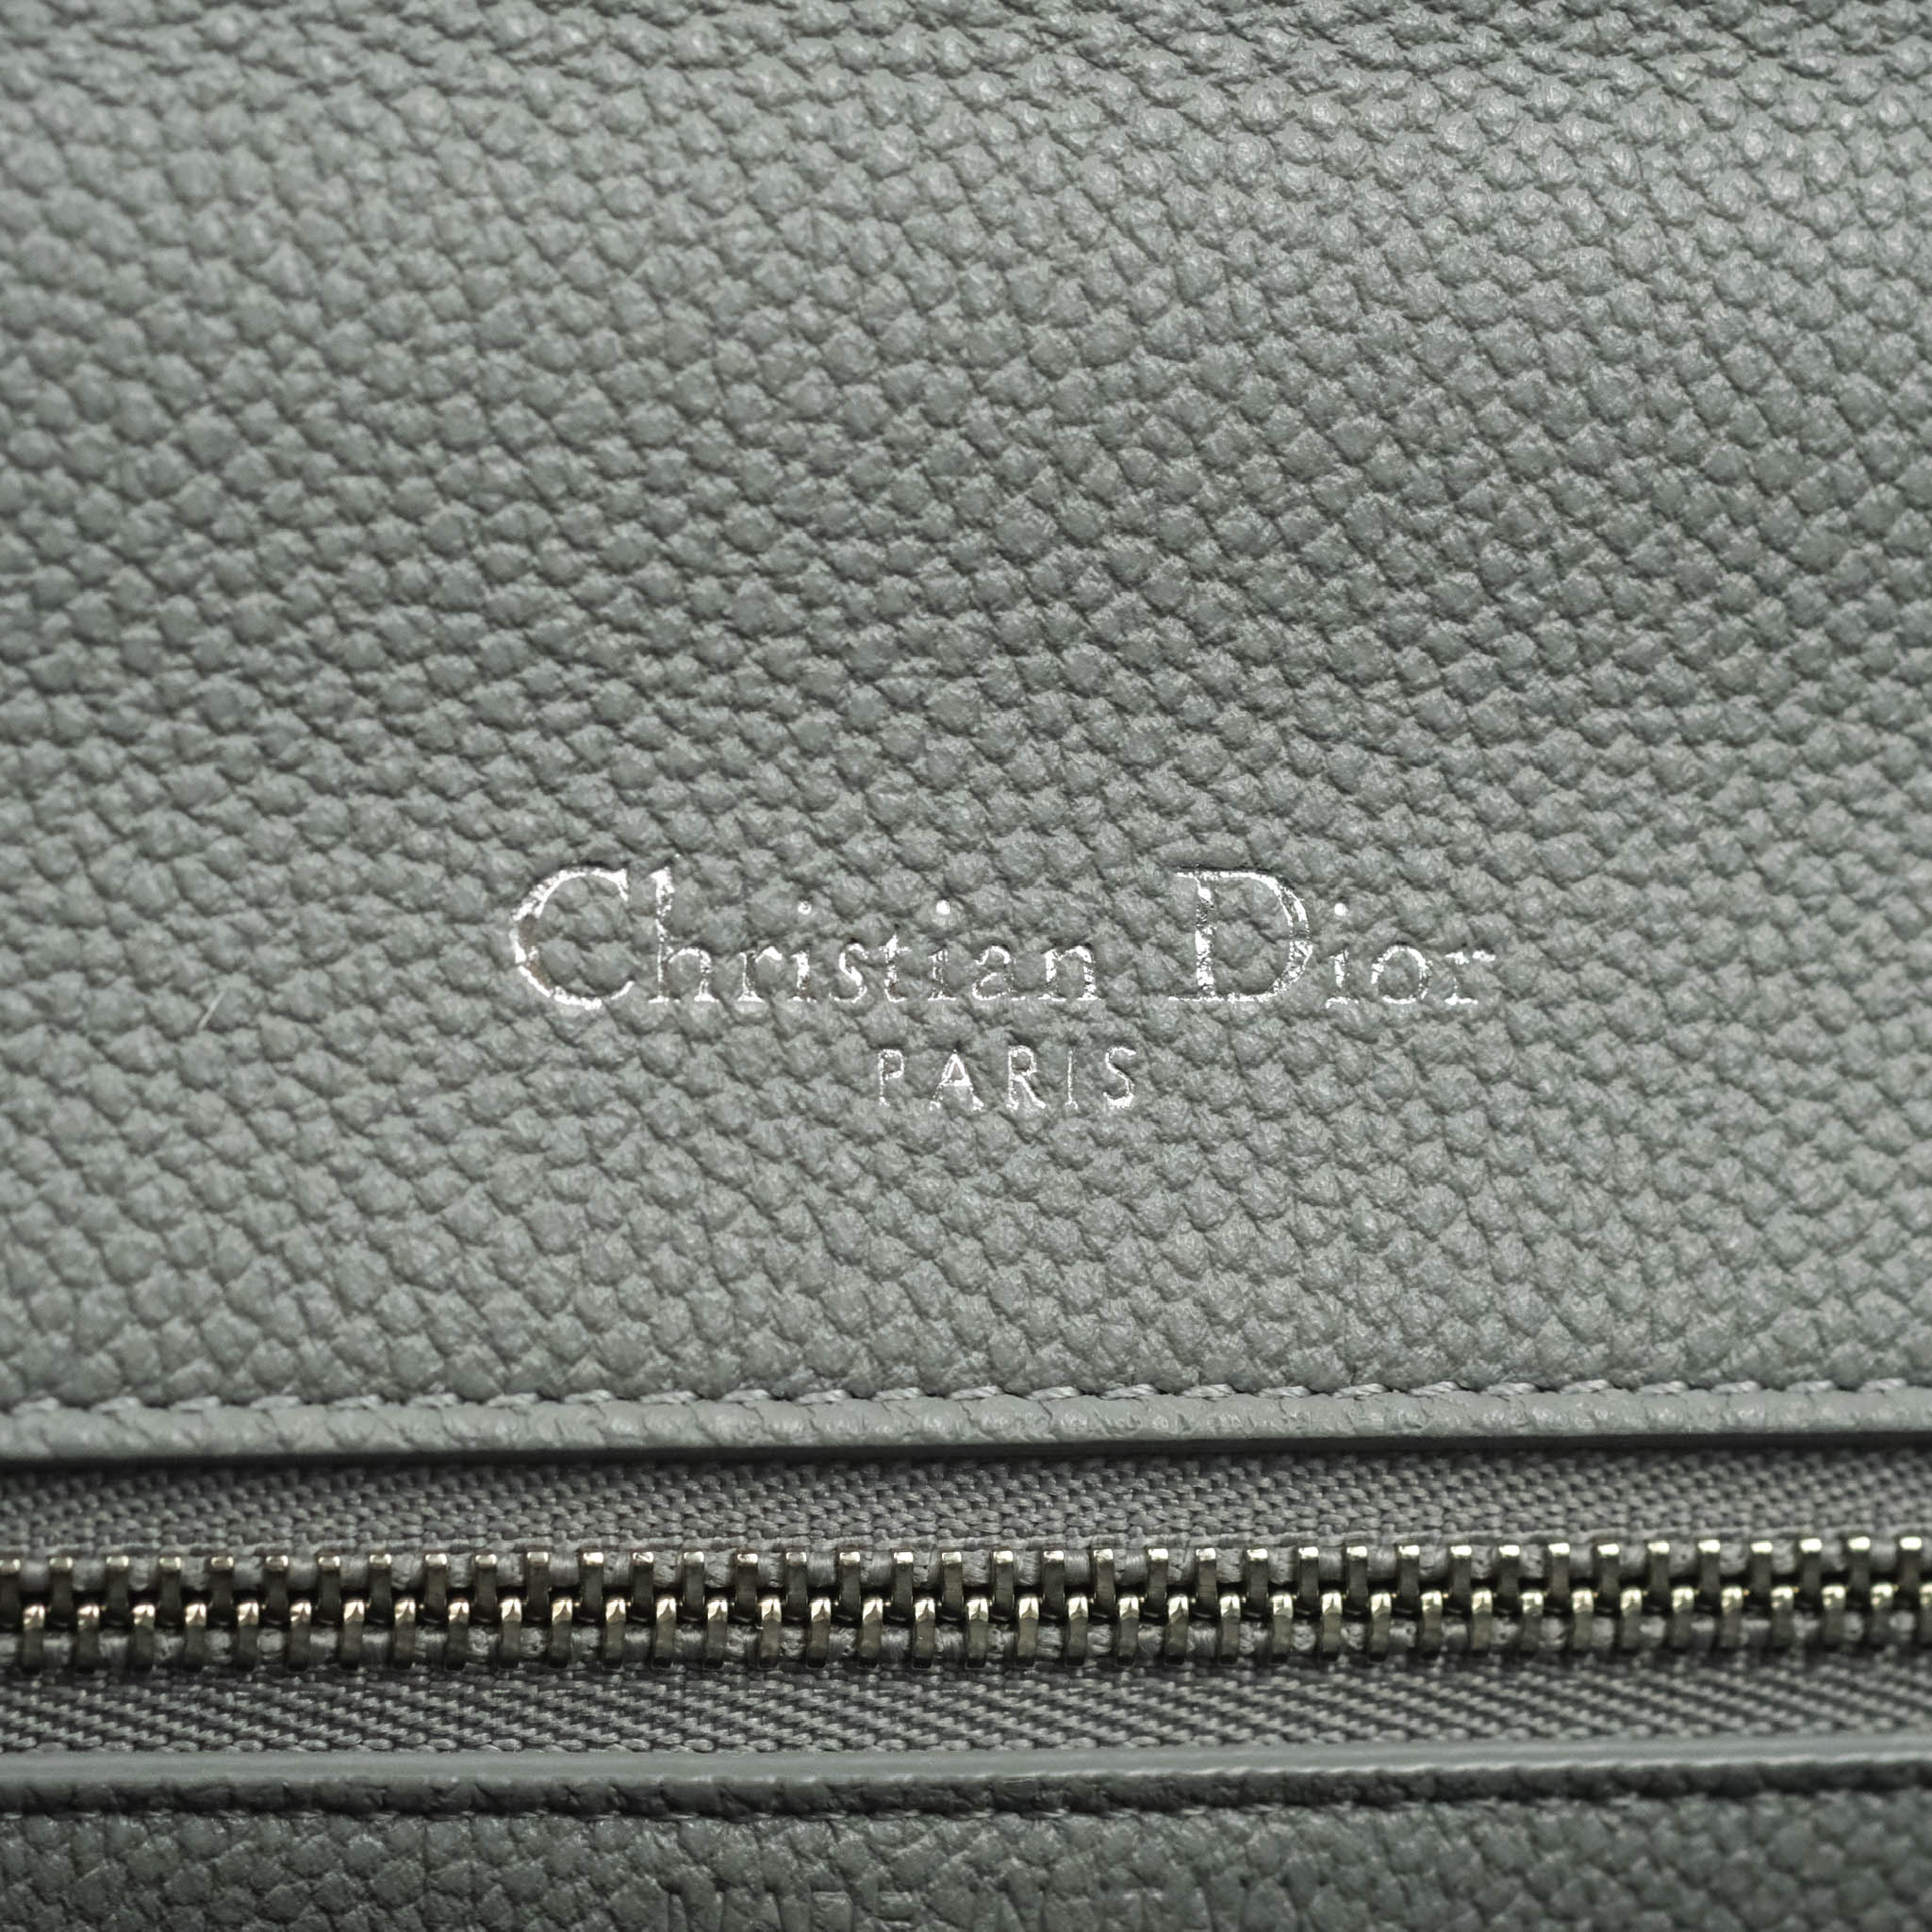 Christian Dior Black Grained Calfskin Medium Diorama Silver Hardware, 2017  Available For Immediate Sale At Sotheby's